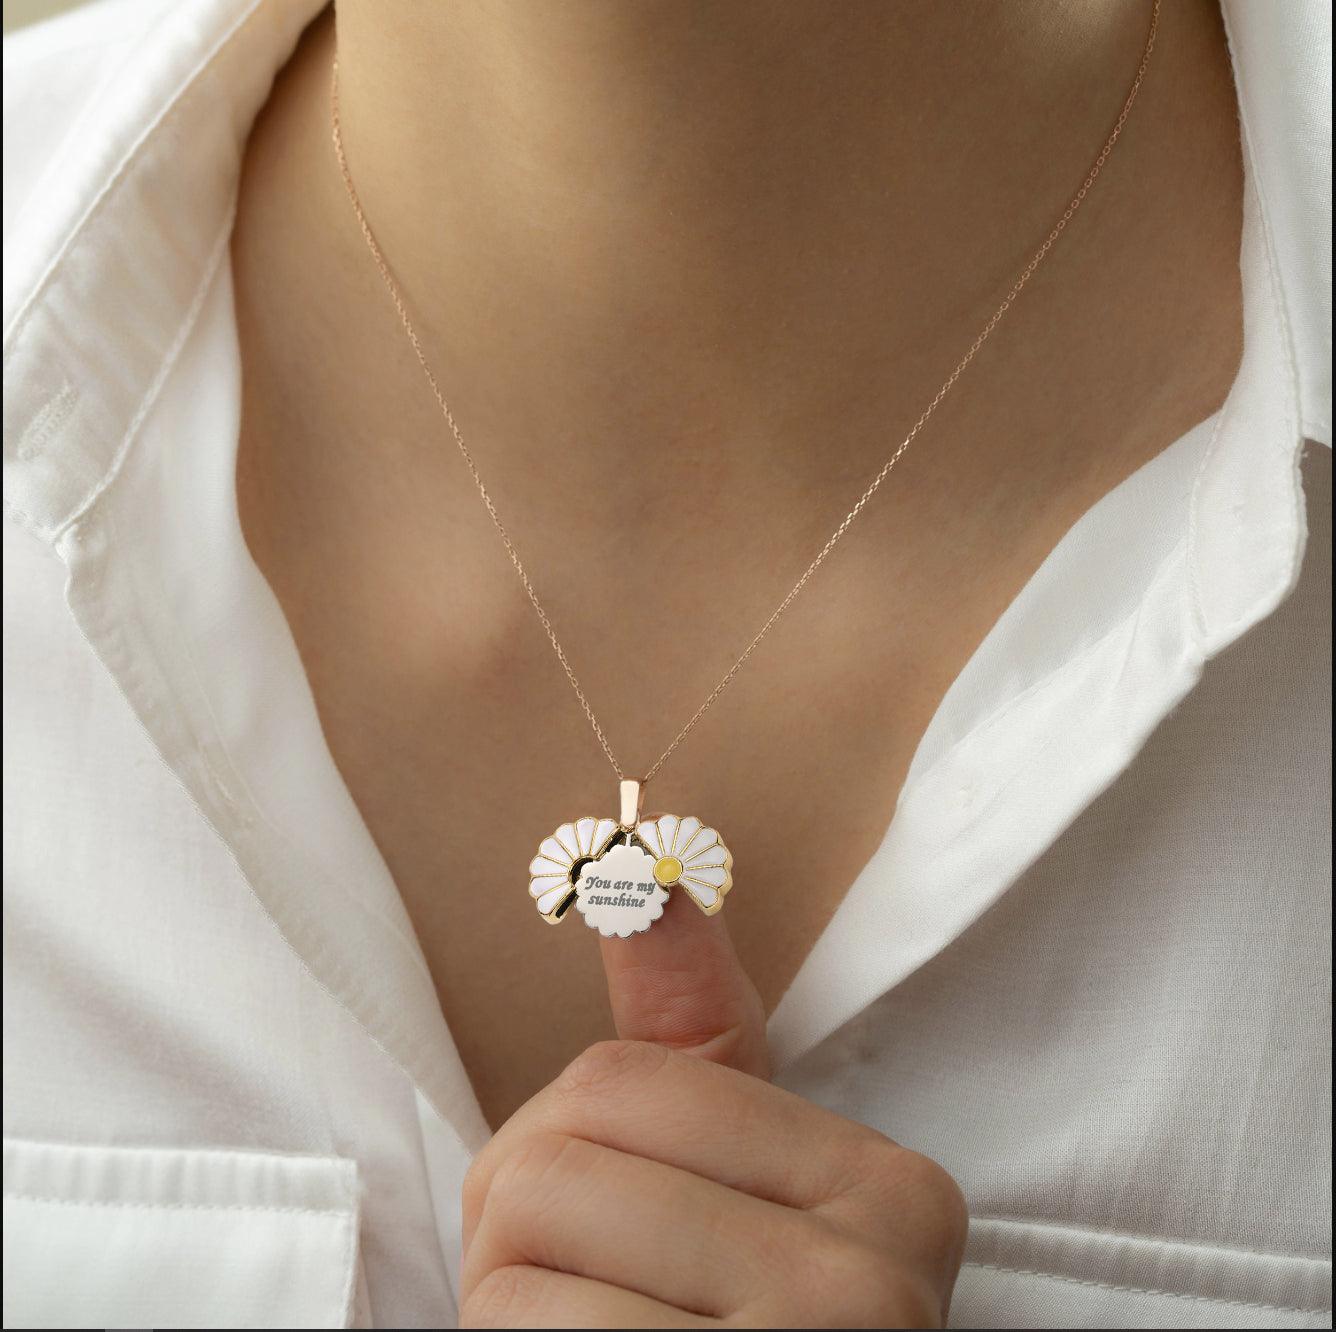 Adopt a Queen - "Sunshine" Necklace - The Project Honey Bees